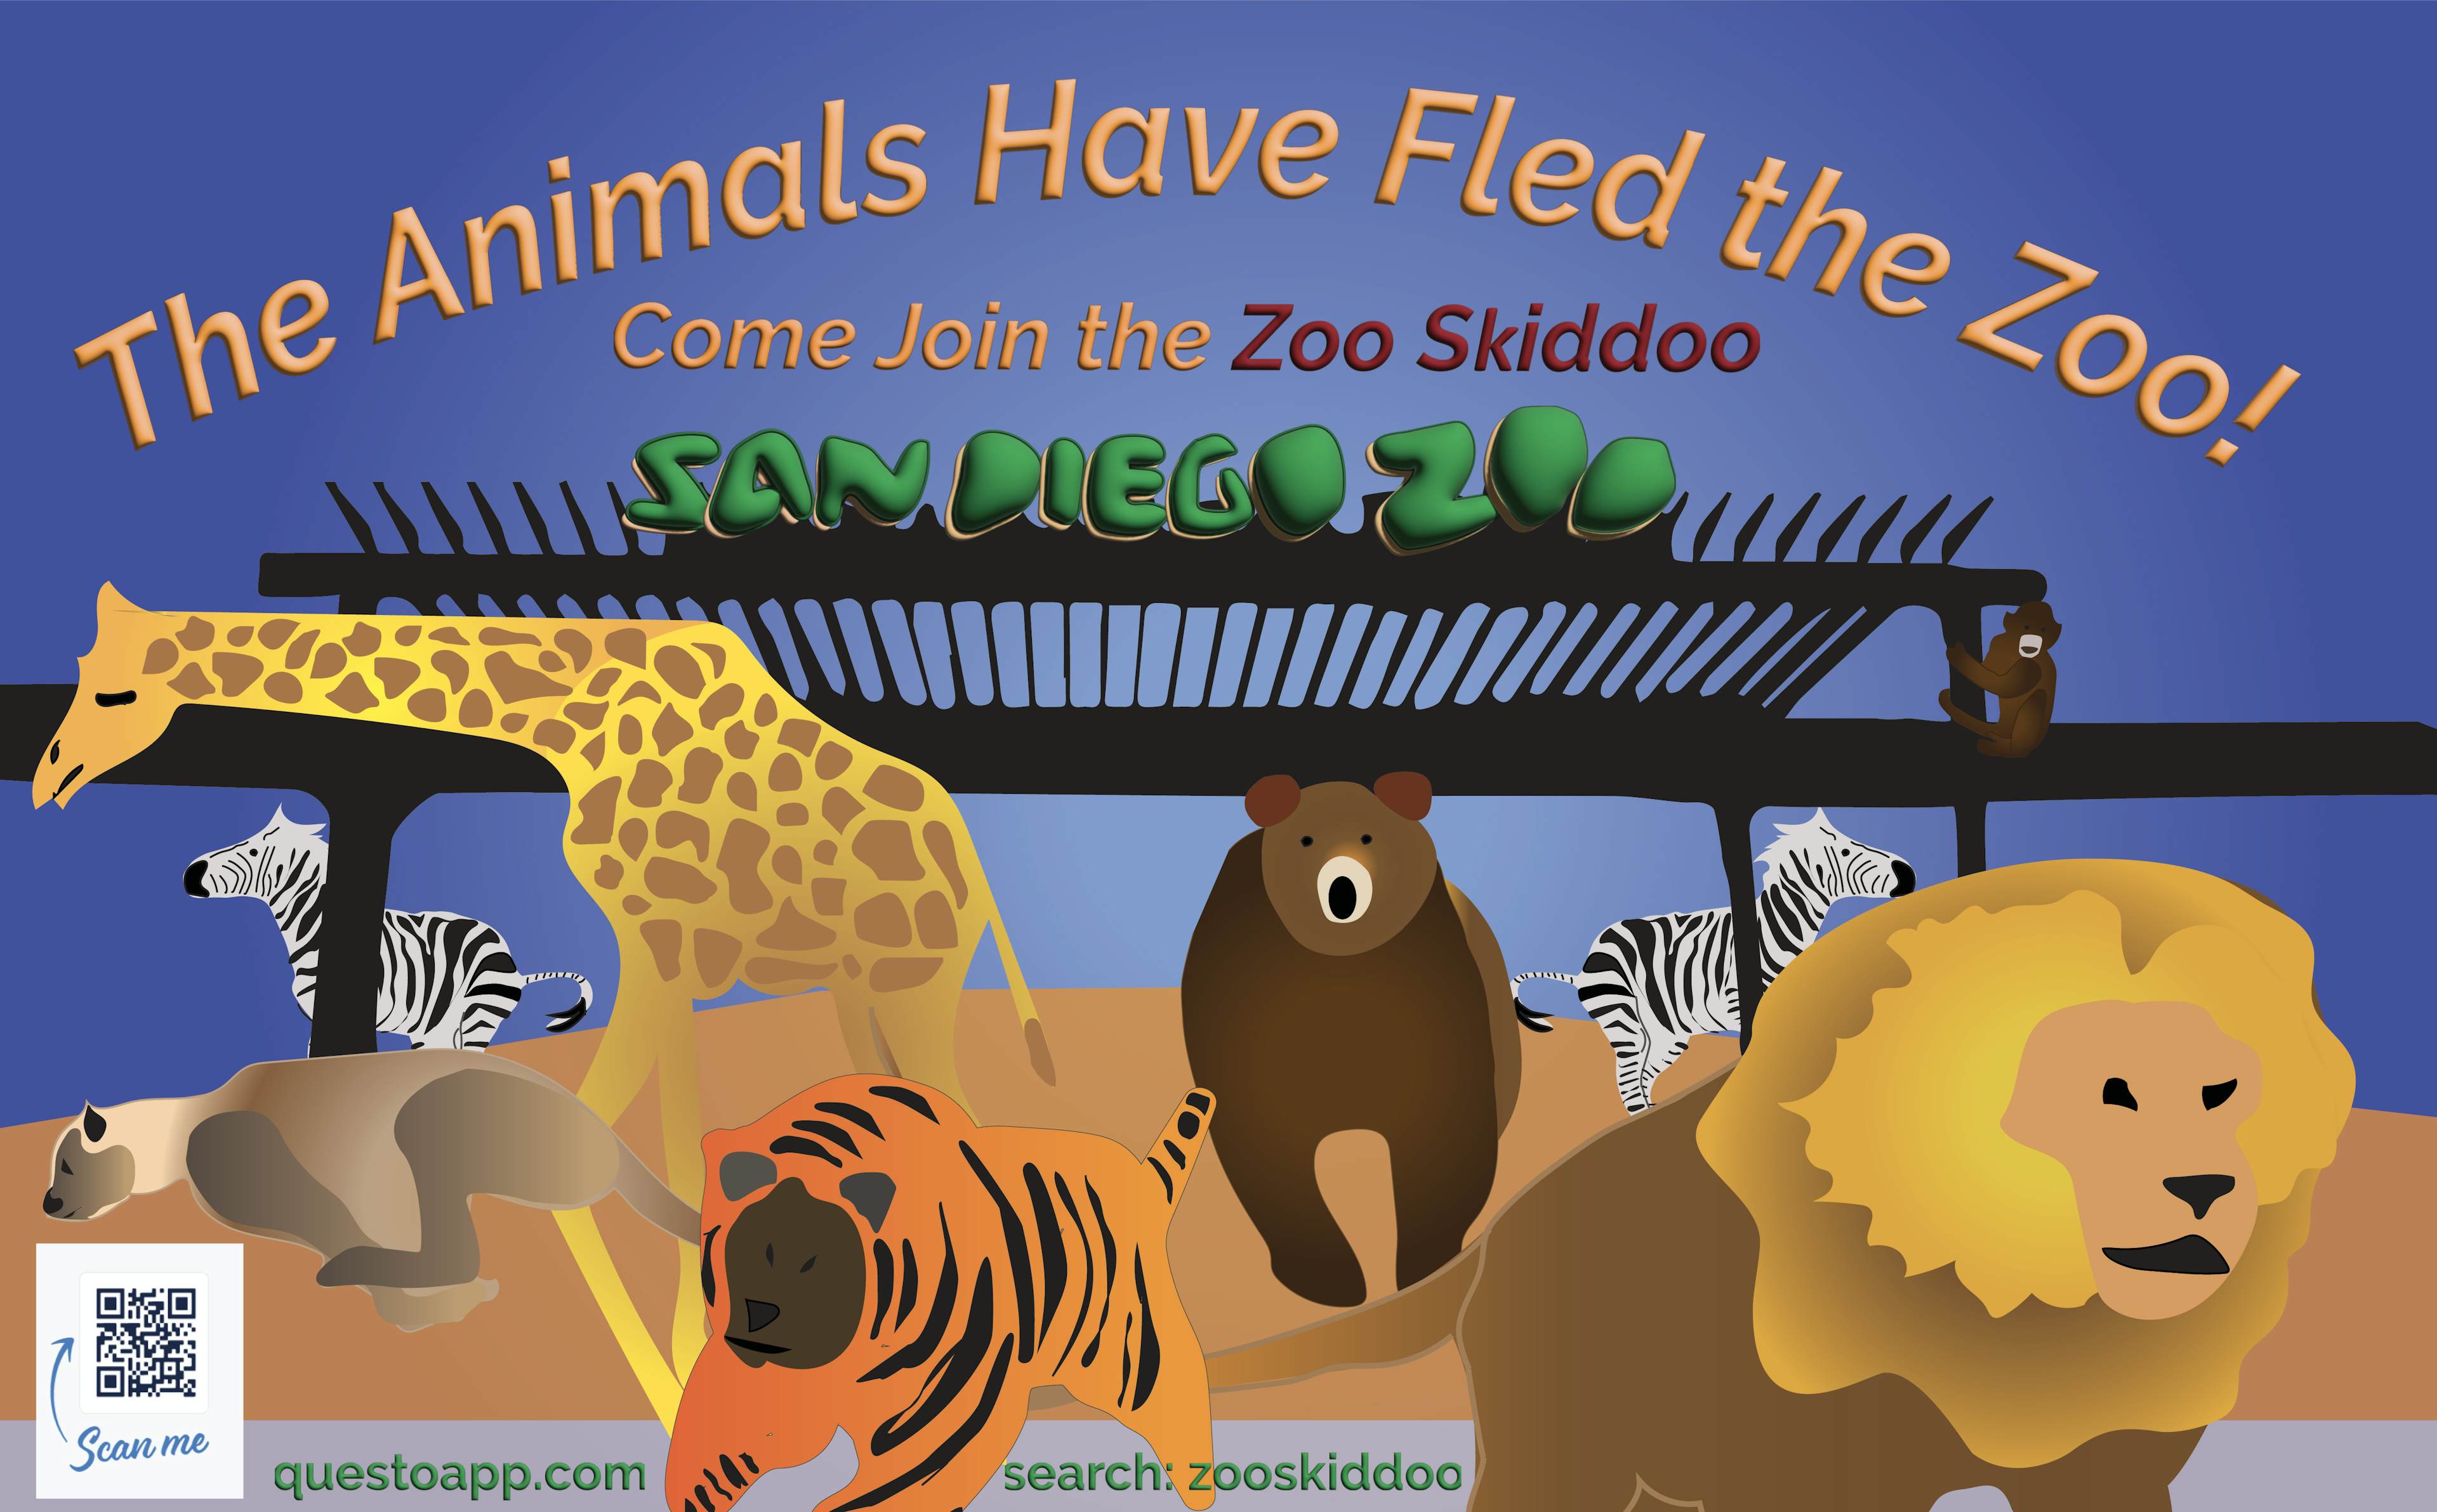 San Diego: The Animals Have Fled the Zoo! image